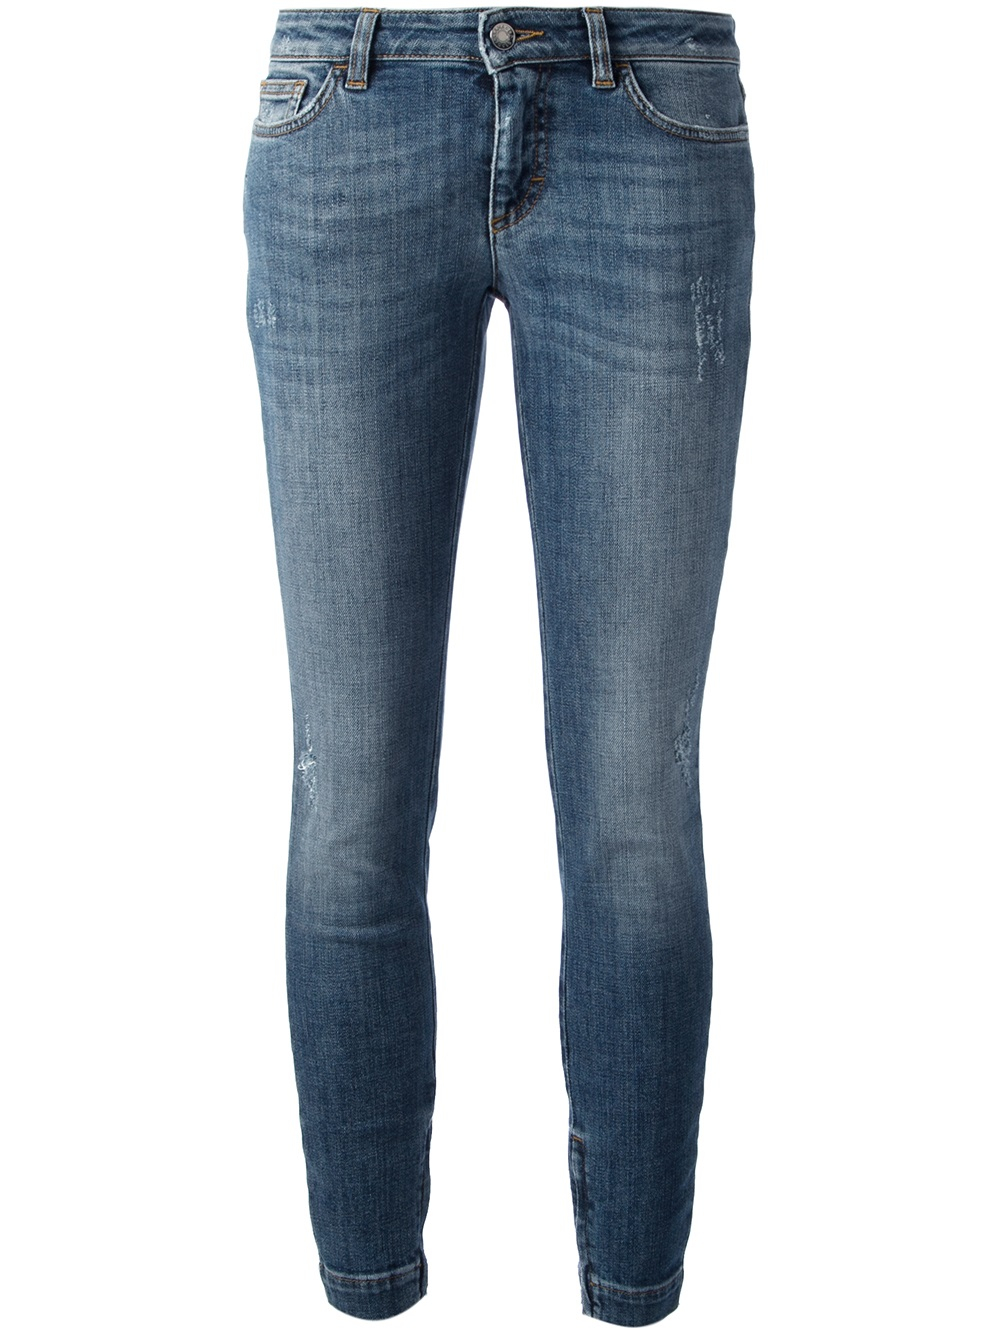 Dolce & Gabbana Skinny Cropped Jeans in Blue | Lyst